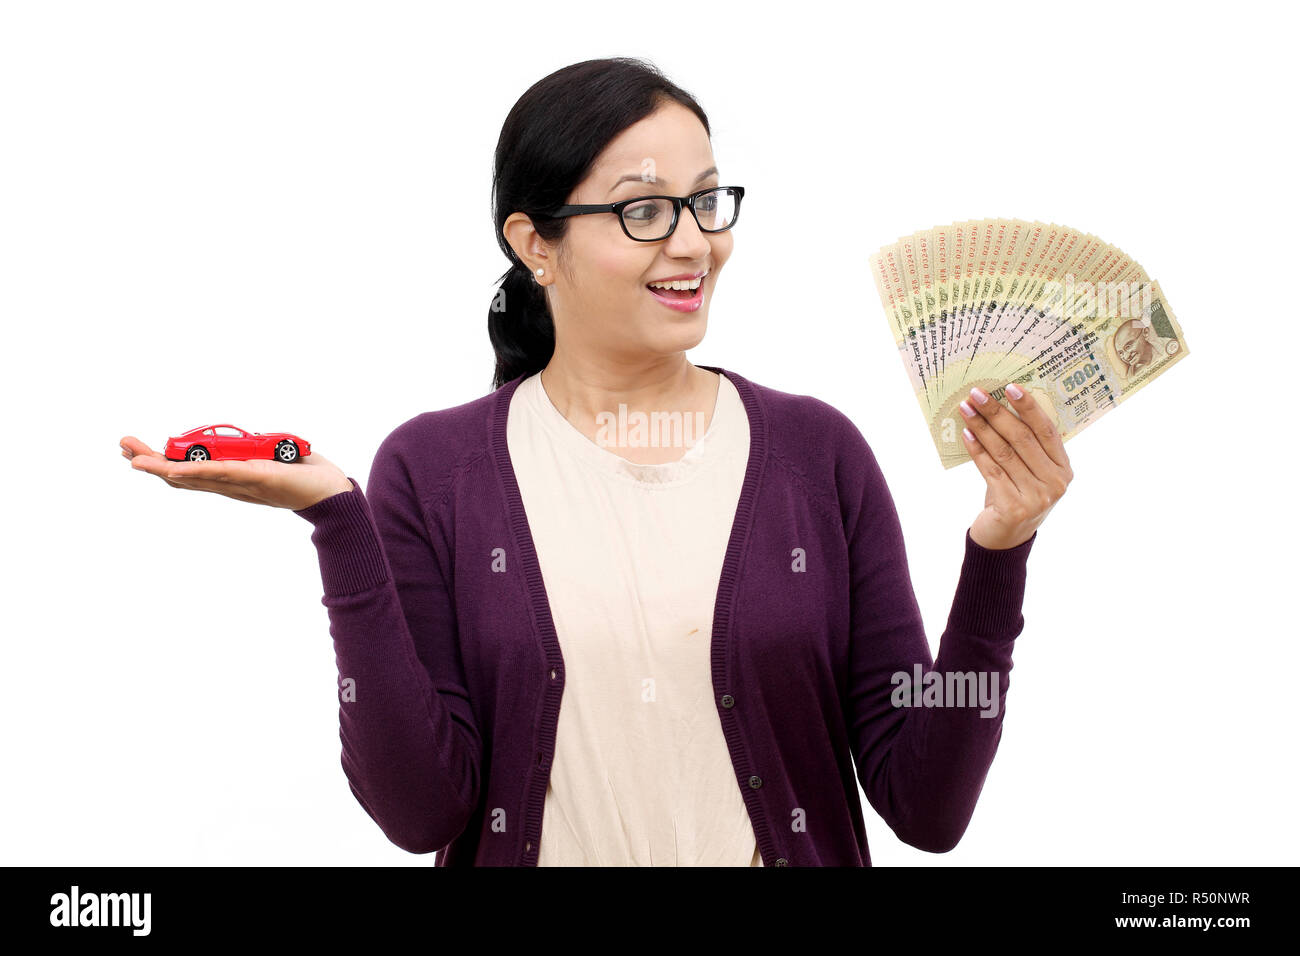 Young woman holding a toy car and Indian rupee notes Stock Photo